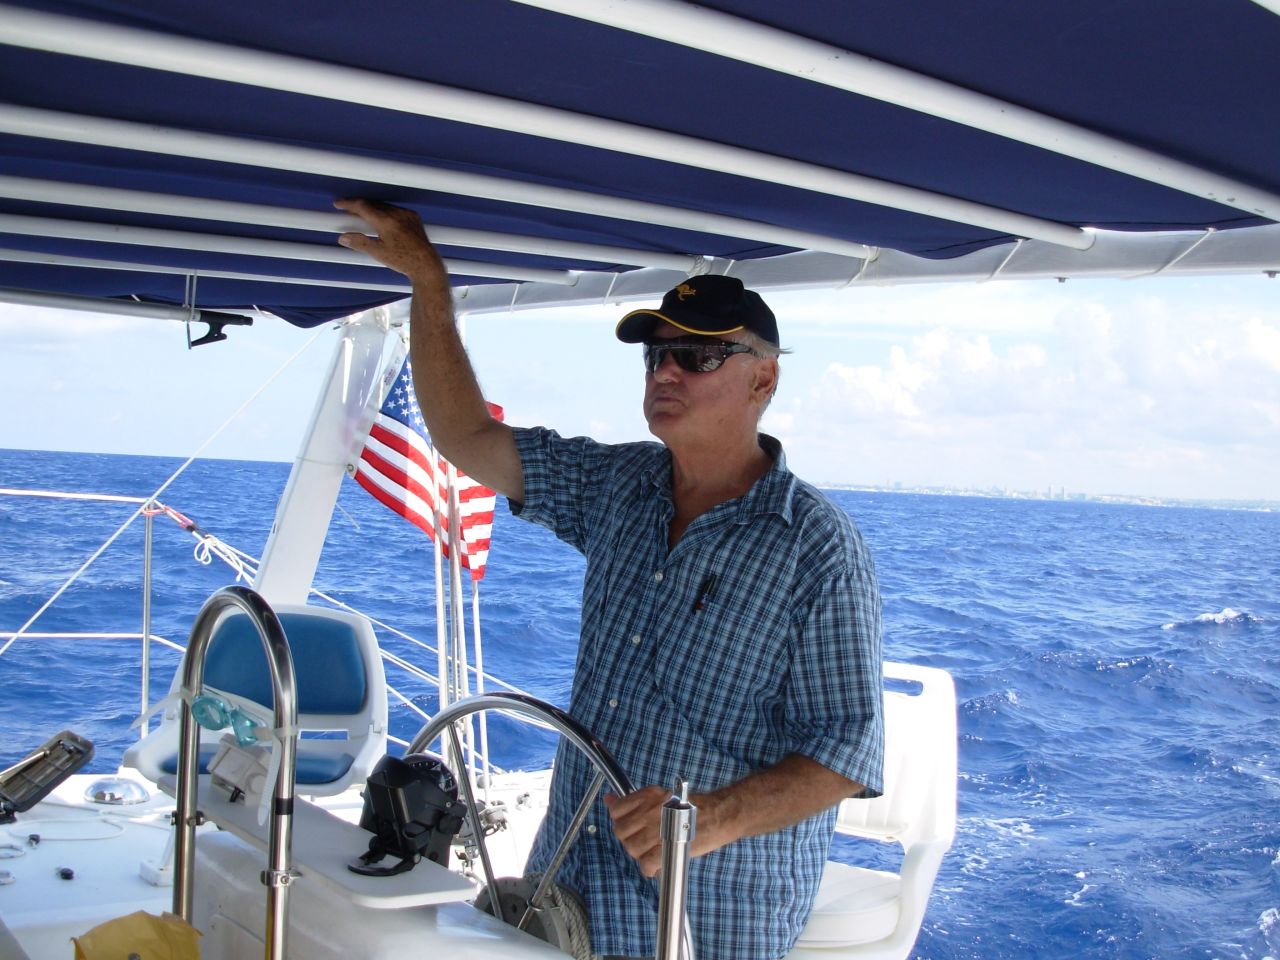 When he was in his 20s, Quen Cultra built a boat and sailed it around the world.  Forty years later, the retired Illinois real estate developer was ready for another adventure.